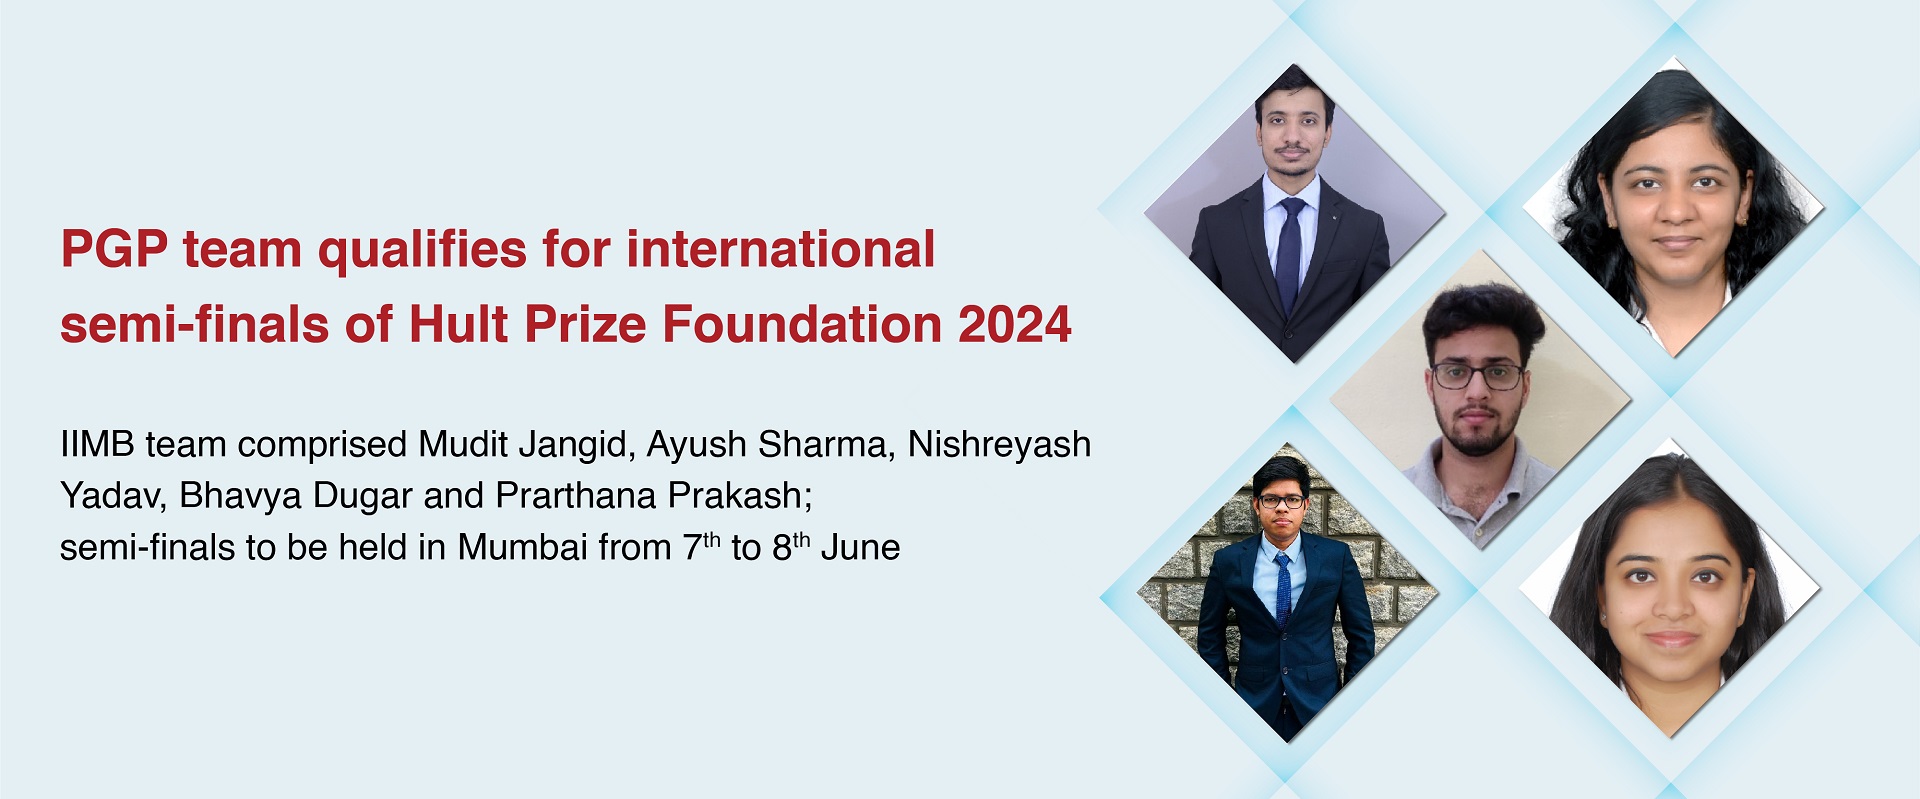 PGP team qualifies for international semi-finals of Hult Prize Foundation 2024 